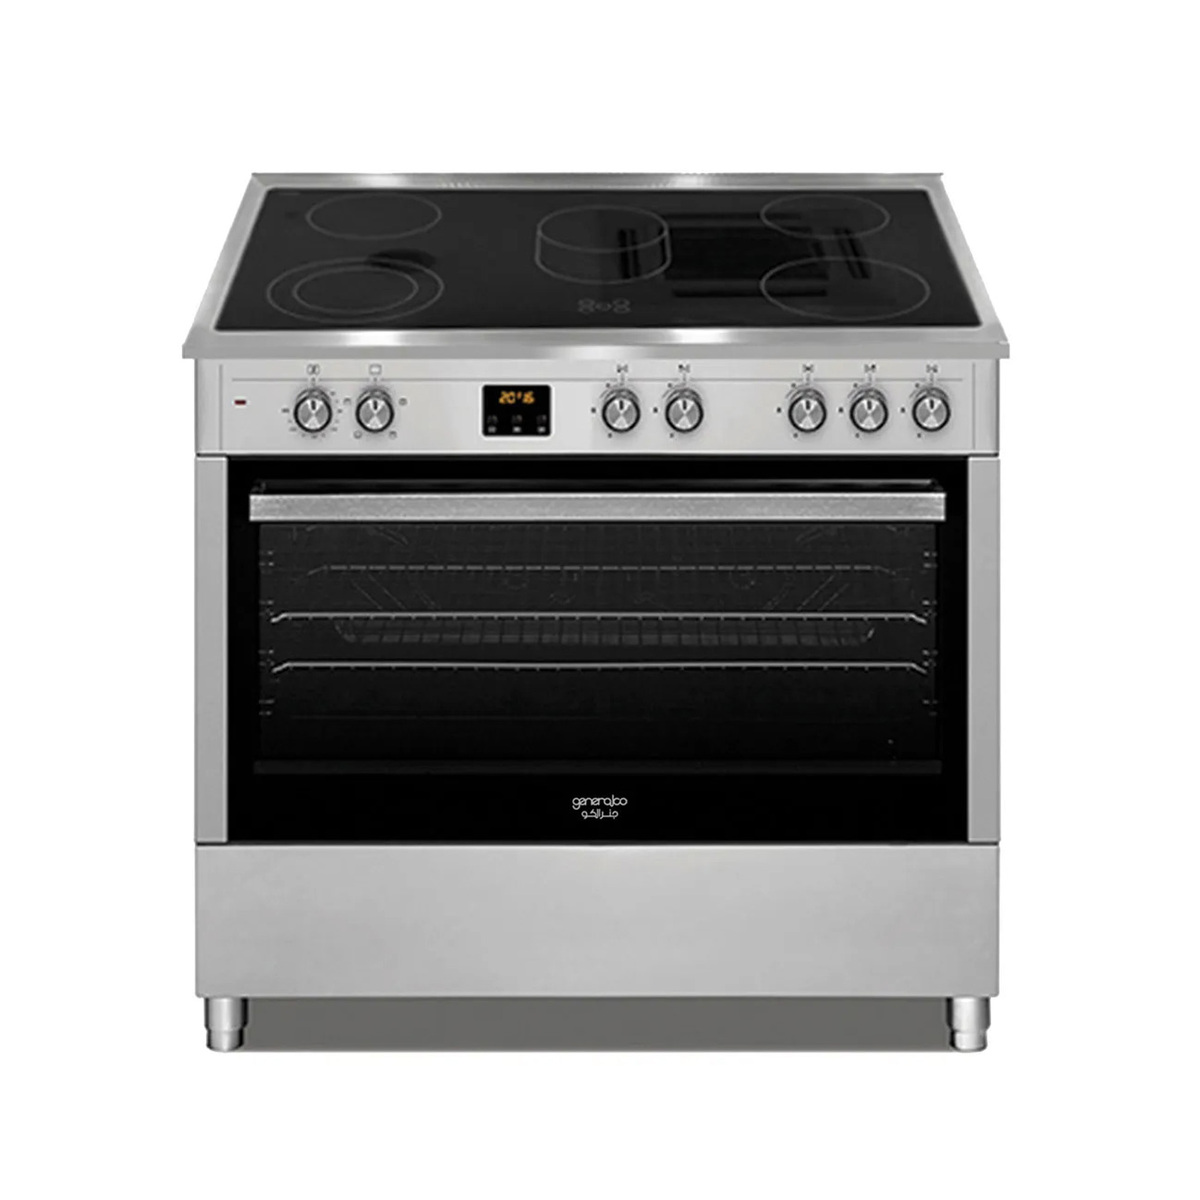 Generalco Ceramic Cooker, 90 x 60 cm, Stainless Steel, PC90SD